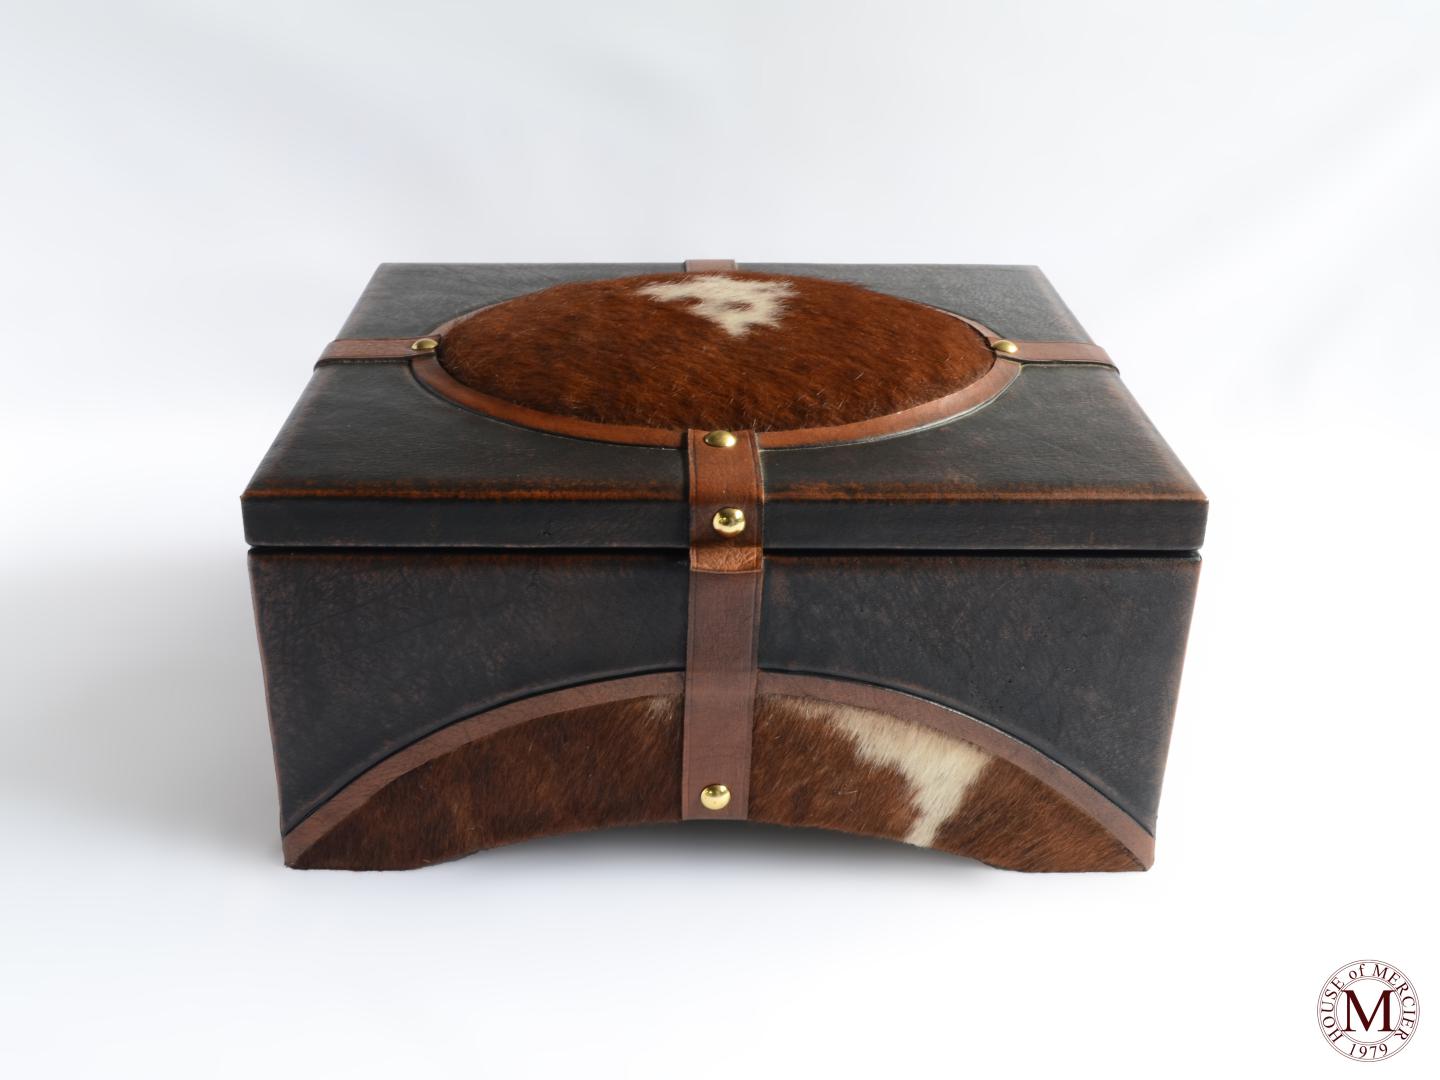 leather box with a cowhide hair real brown/white color and belts